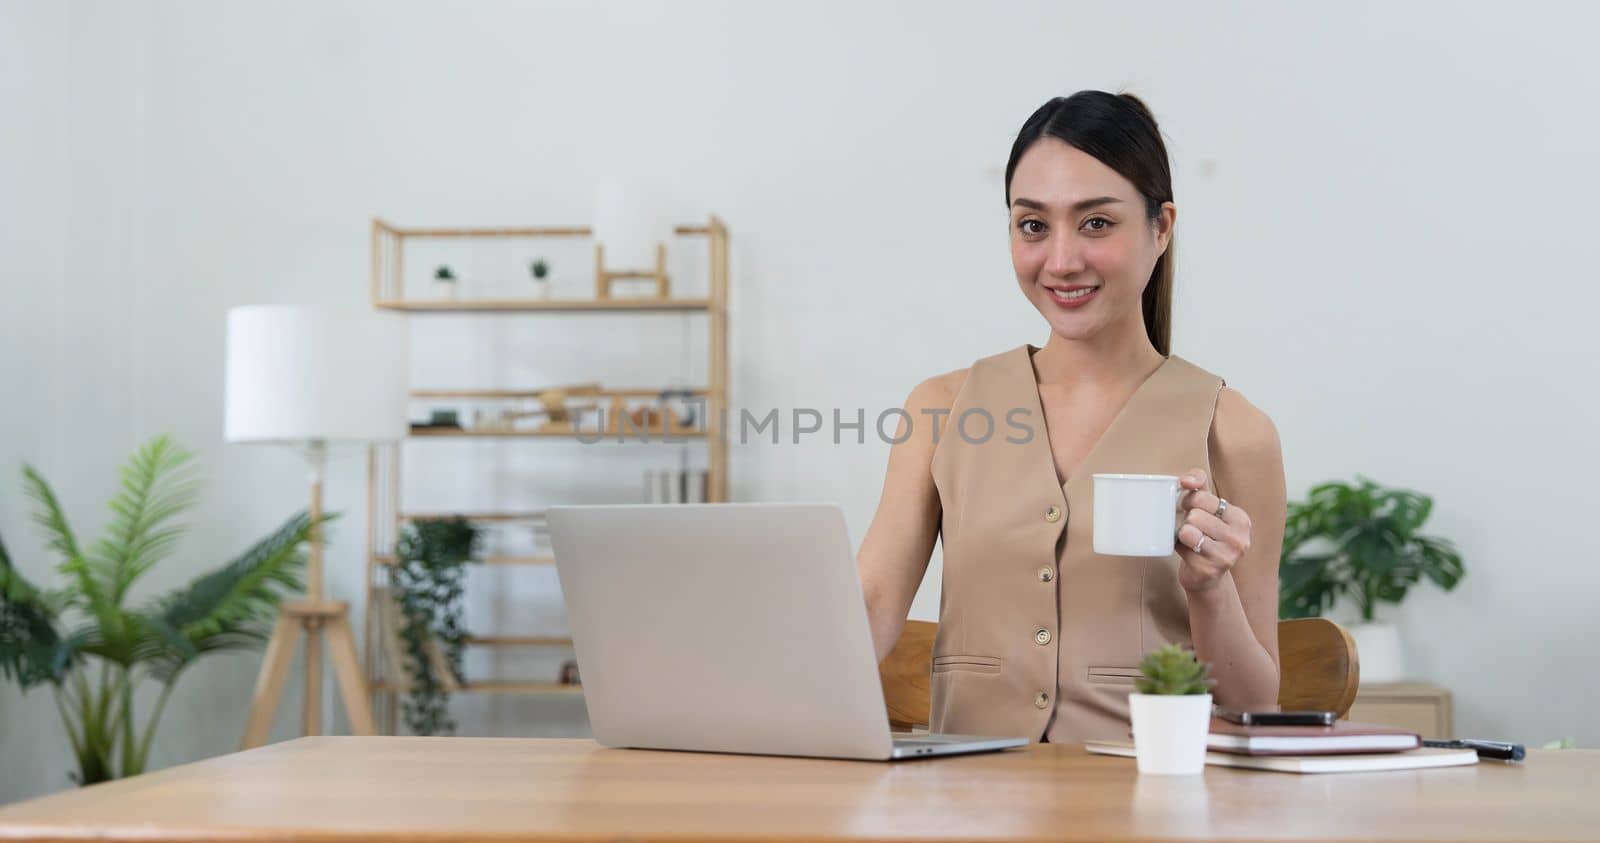 Beautiful young Asian businesswoman smiling holding a coffee mug and laptop working at the office...